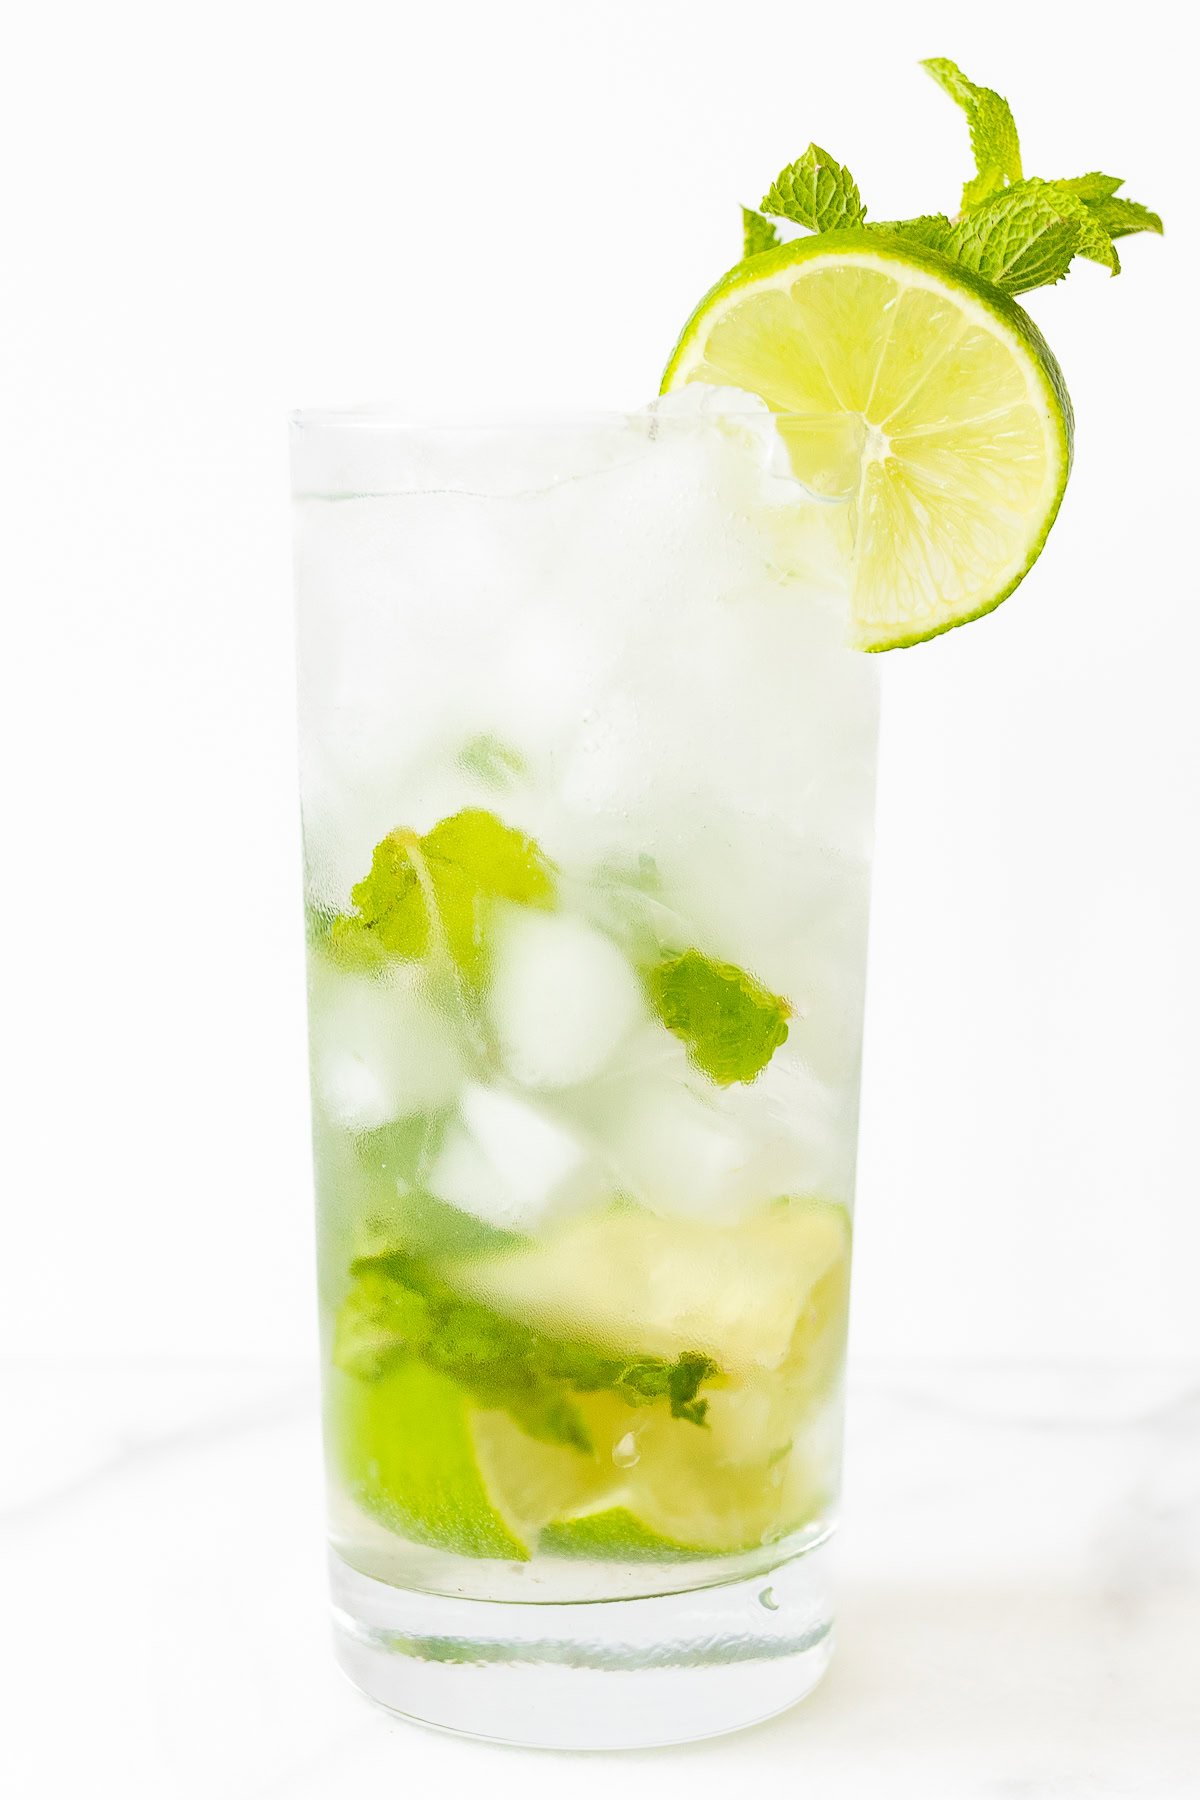 A glass of mojito with lime slices, ice cubes, and fresh mint leaves, garnished with a lime wedge and mint sprig on a white background.